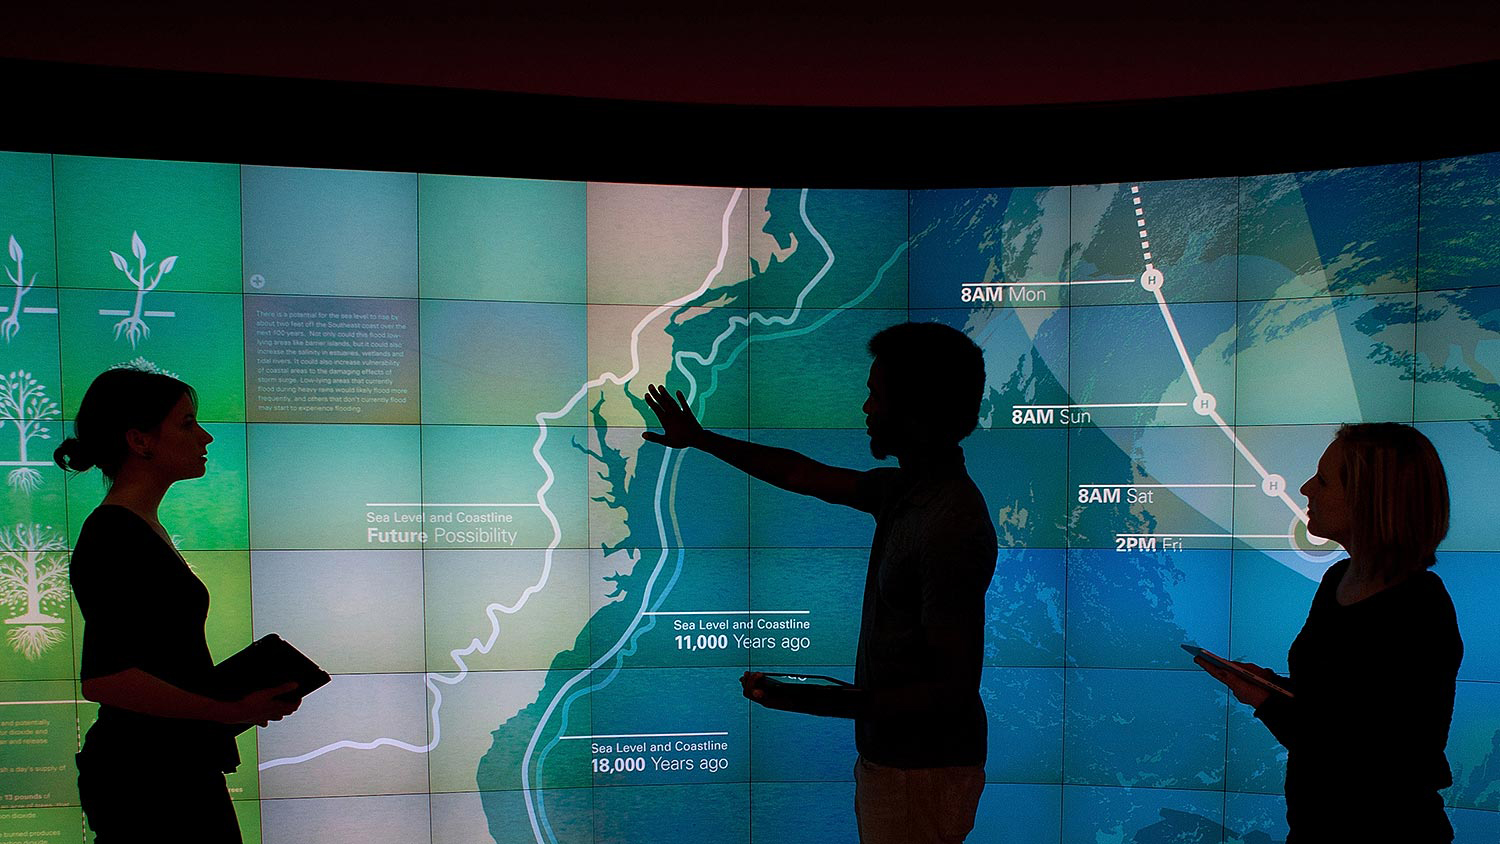 Three scientists silhouetted in front of a screen showing sea level and coastline data.